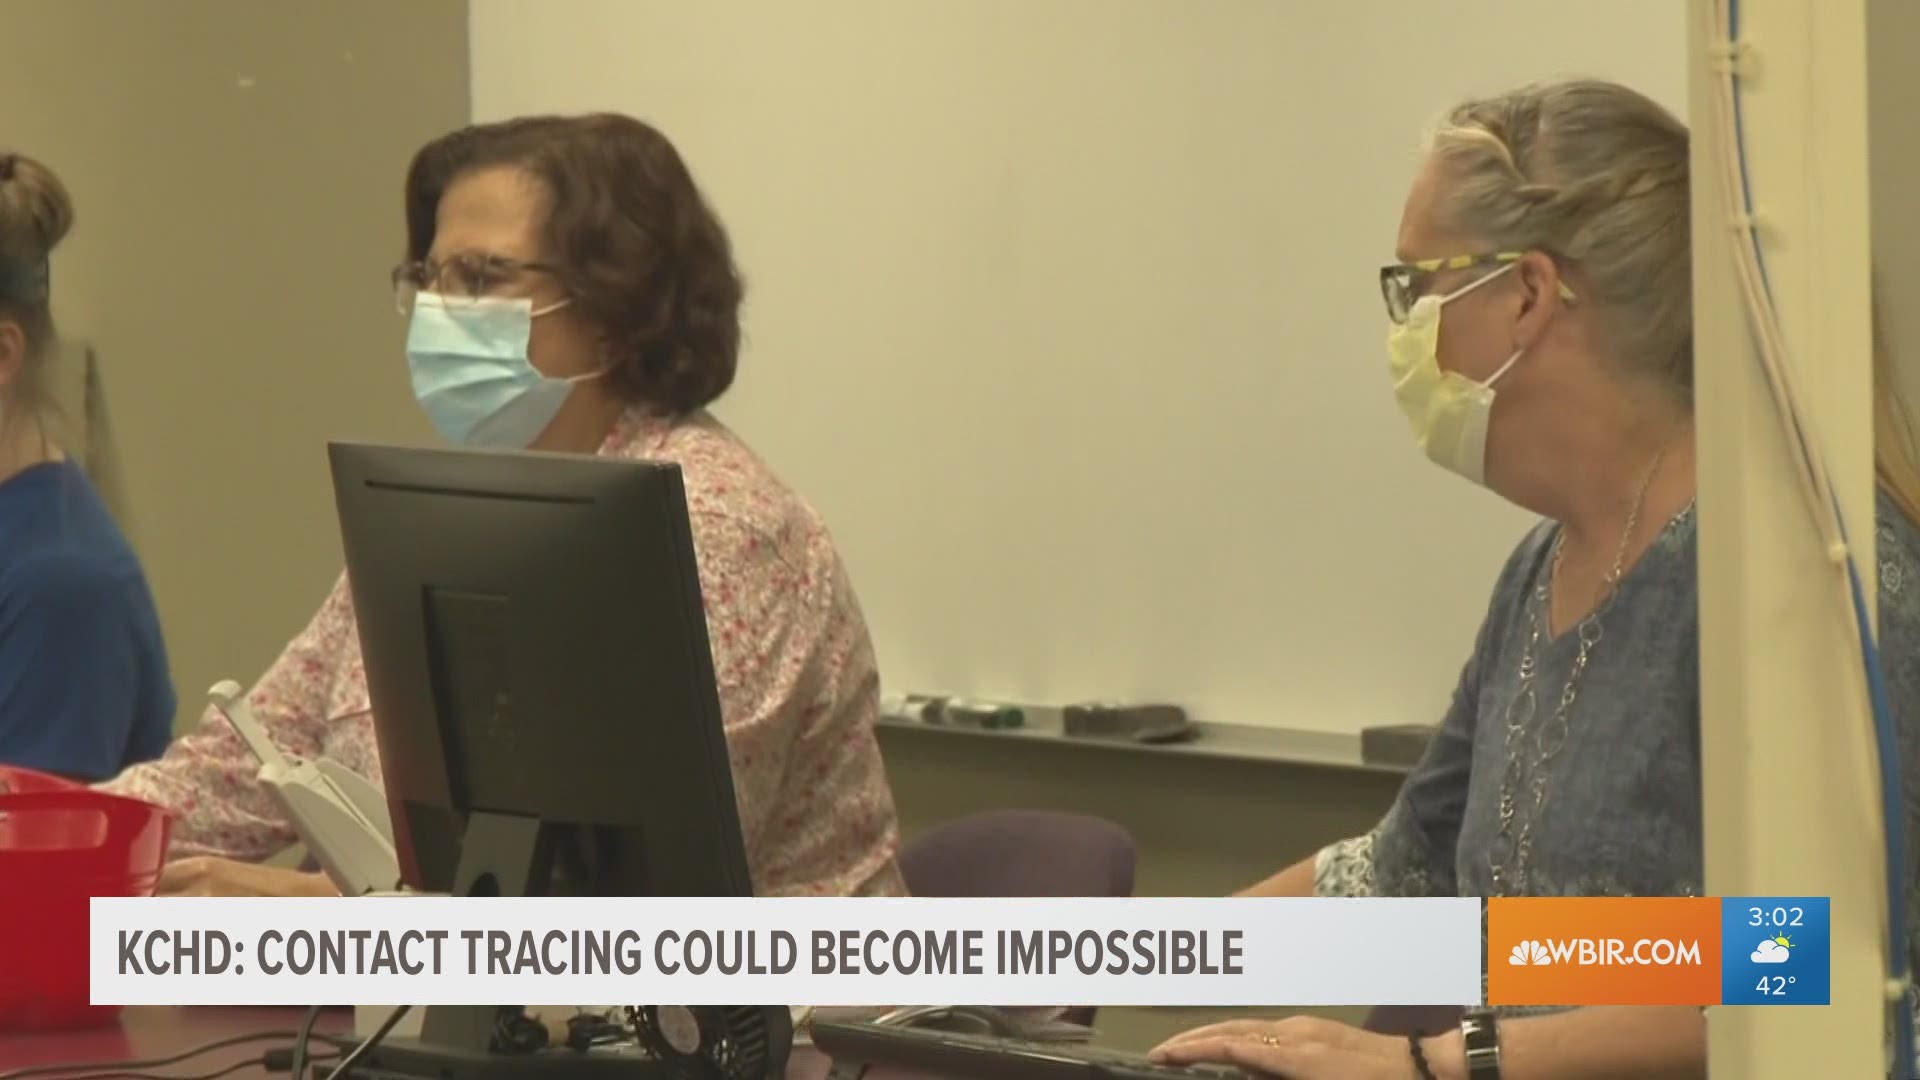 There are so many COVID-19 cases in Knox County, it's becoming increasingly difficult for contact tracers to identify and notify people who may be infected.